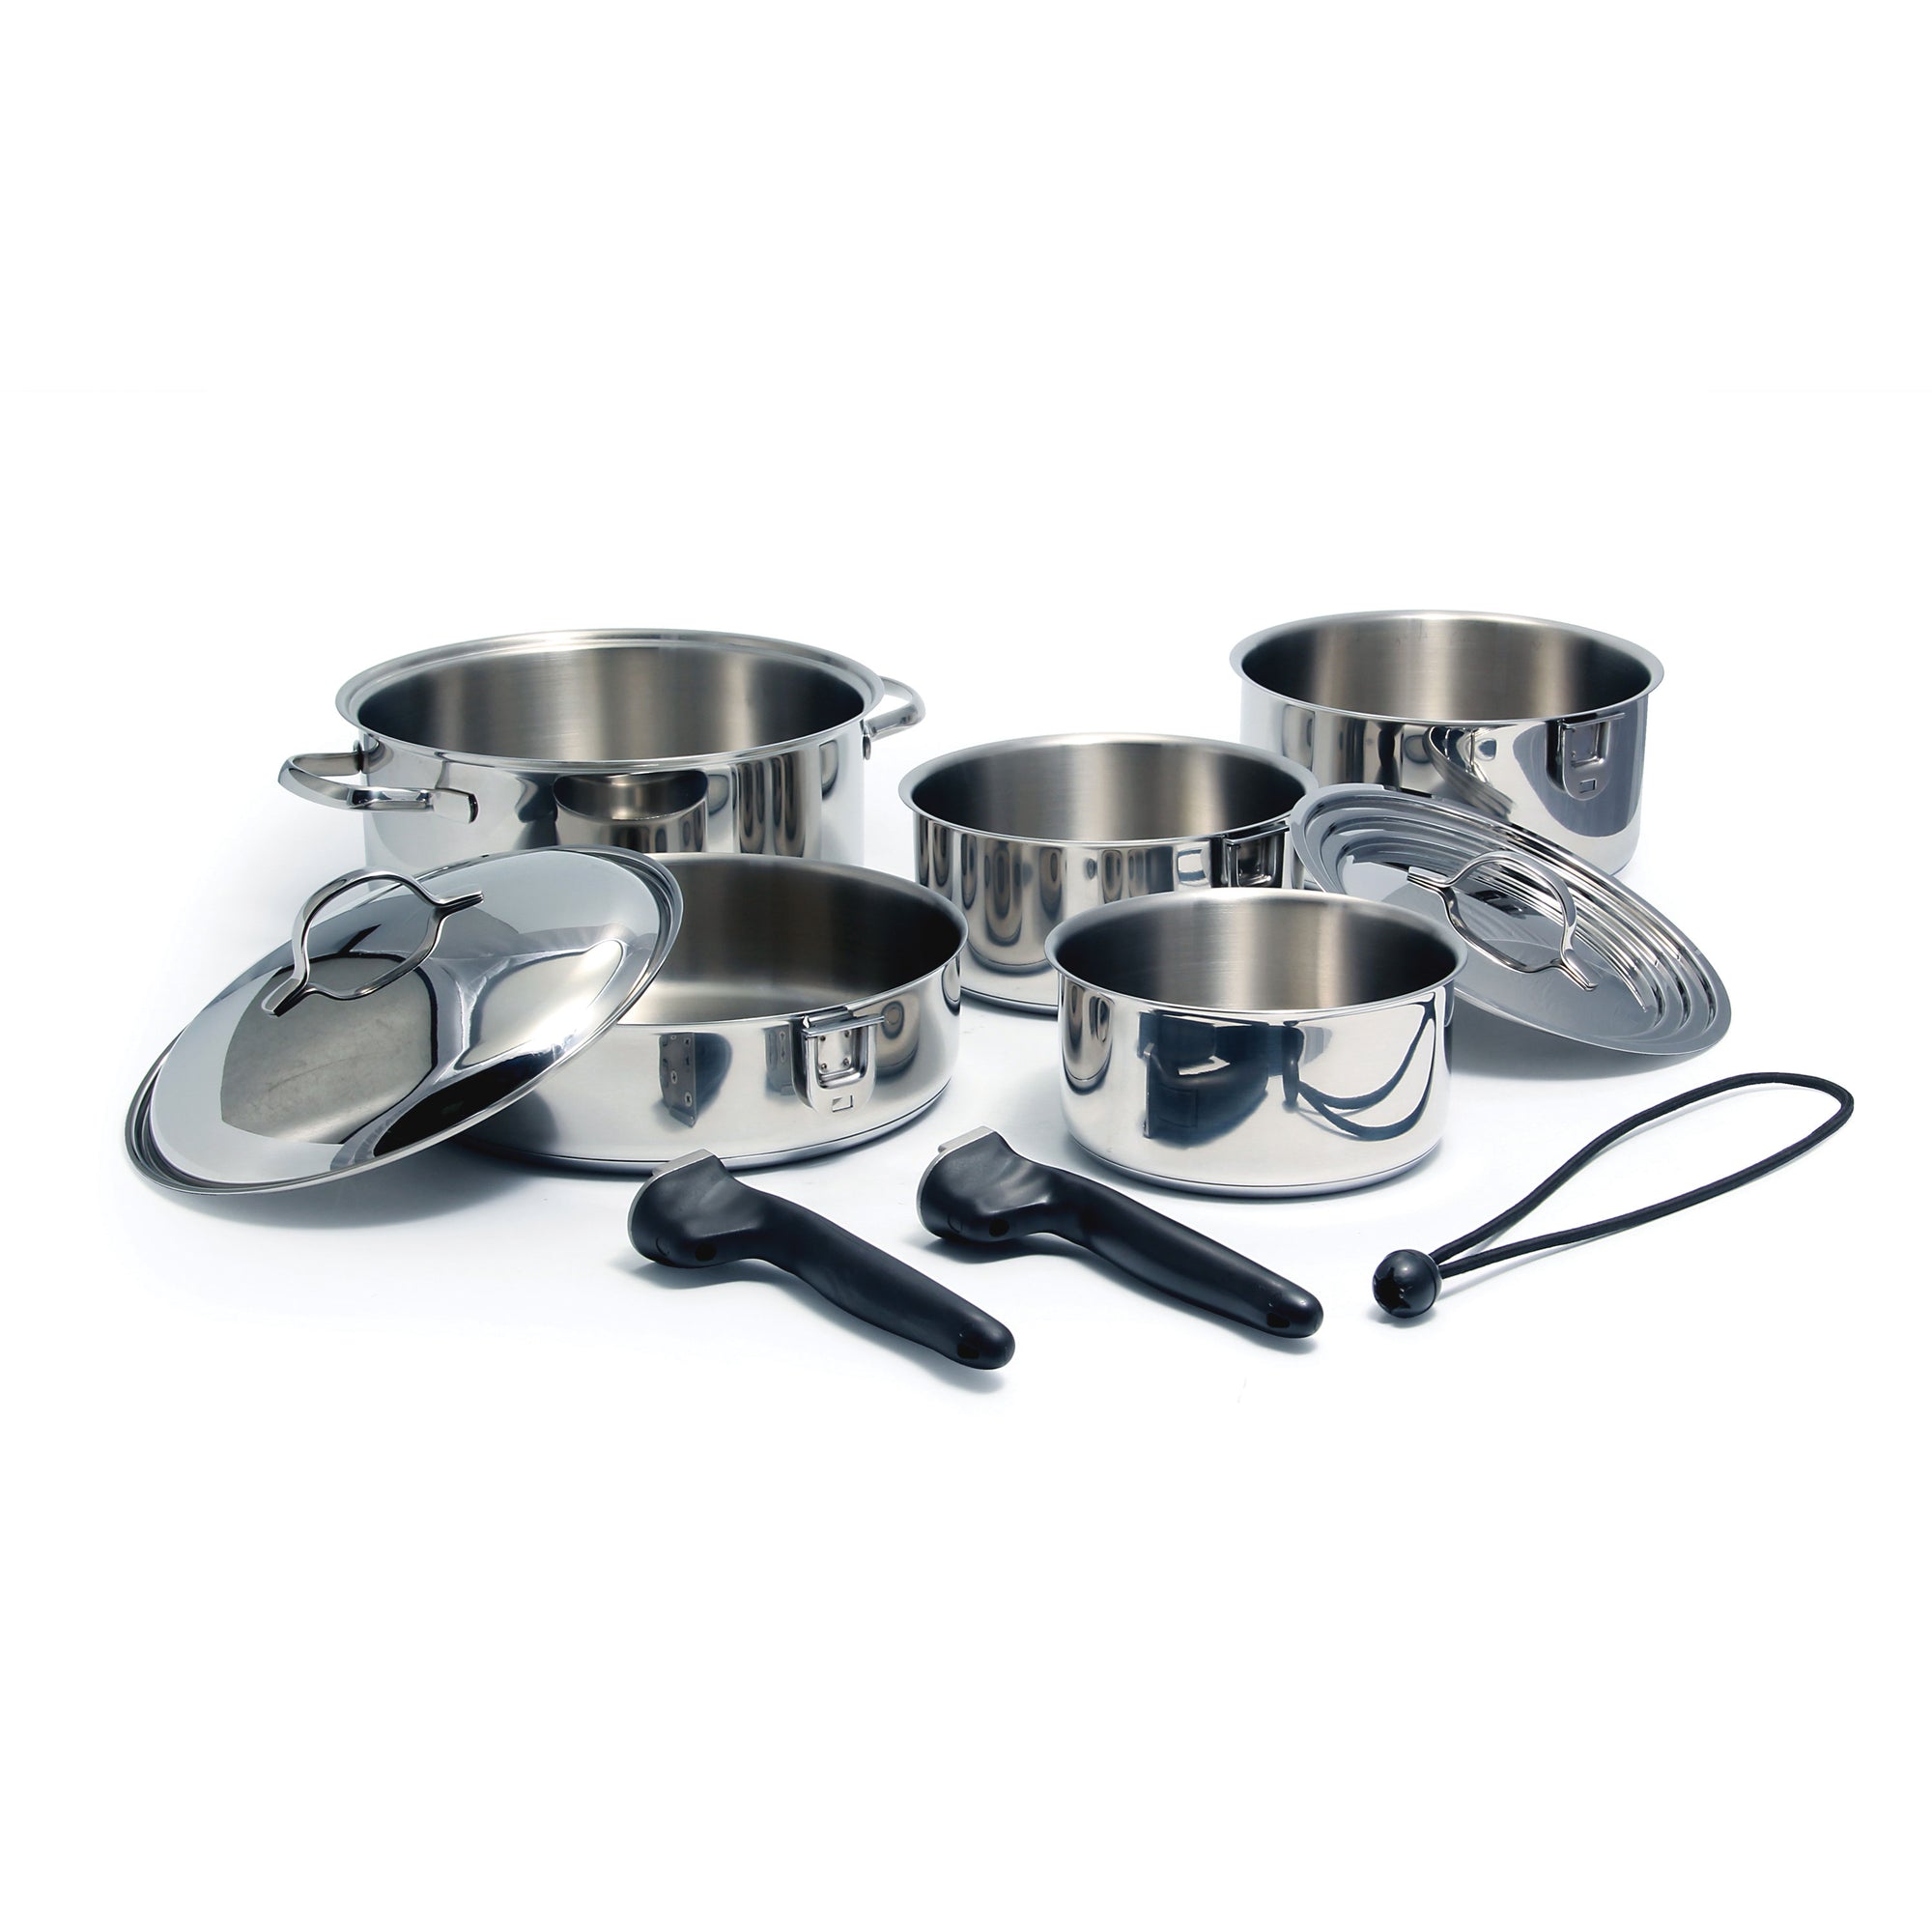 Camco 43921 Cookware 10 Pc Set Nesting Stainless Steel